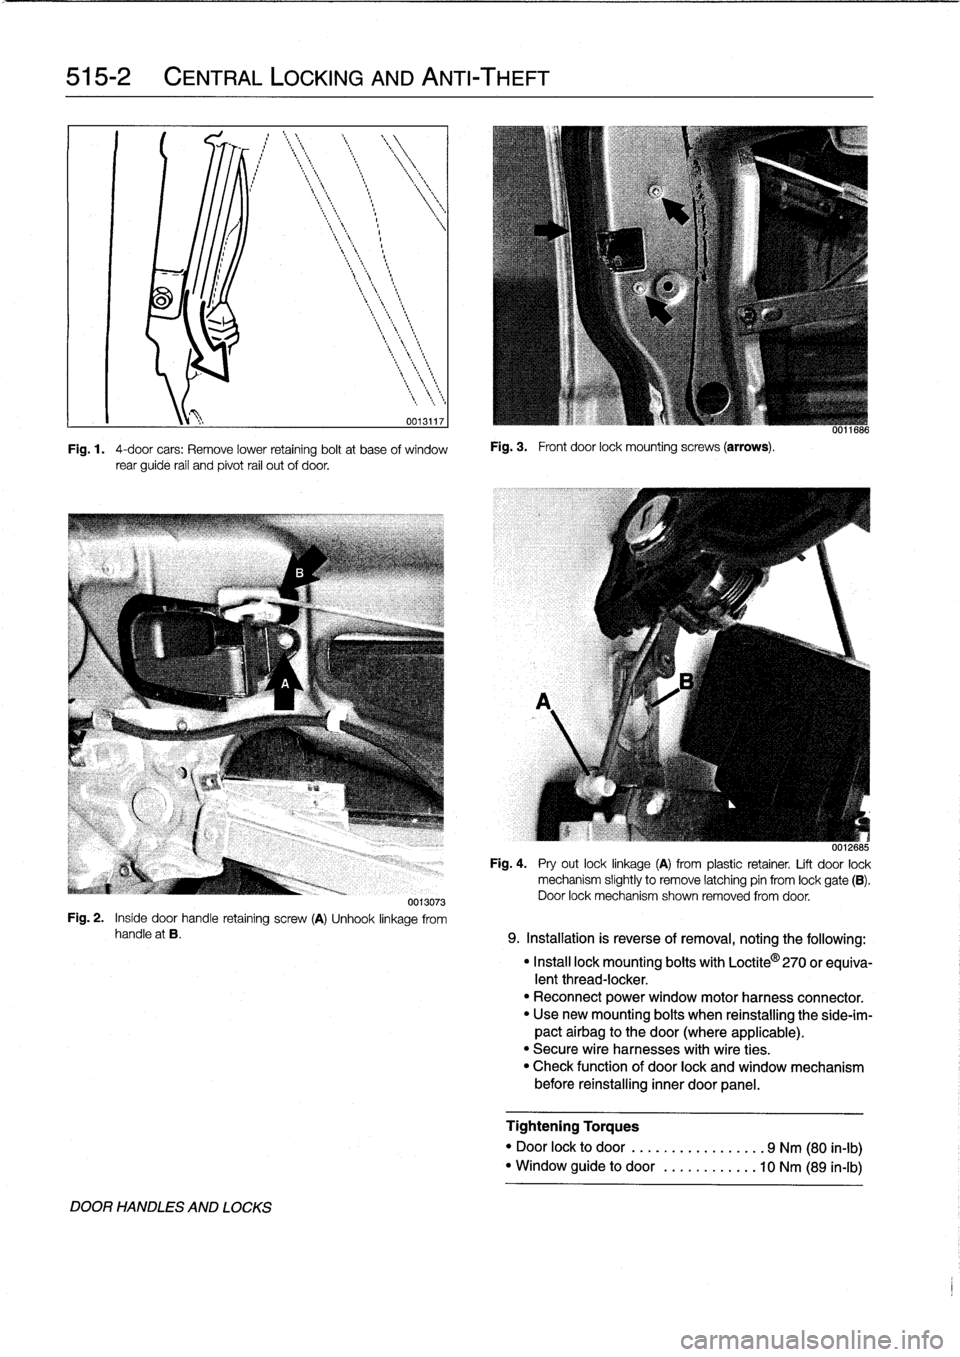 BMW M3 1993 E36 Workshop Manual 
515-2

	

CENTRAL
LOCKING
AND
ANTI-THEFT

0013117

Fig
.
1
.

	

4-door
cars
:
Remove
lower
retaining
boltat
base
of
window
rear
guide
rail
and
pivot
rail
out
of
door
.

Fig
.
3
.

	

Front
door
lock